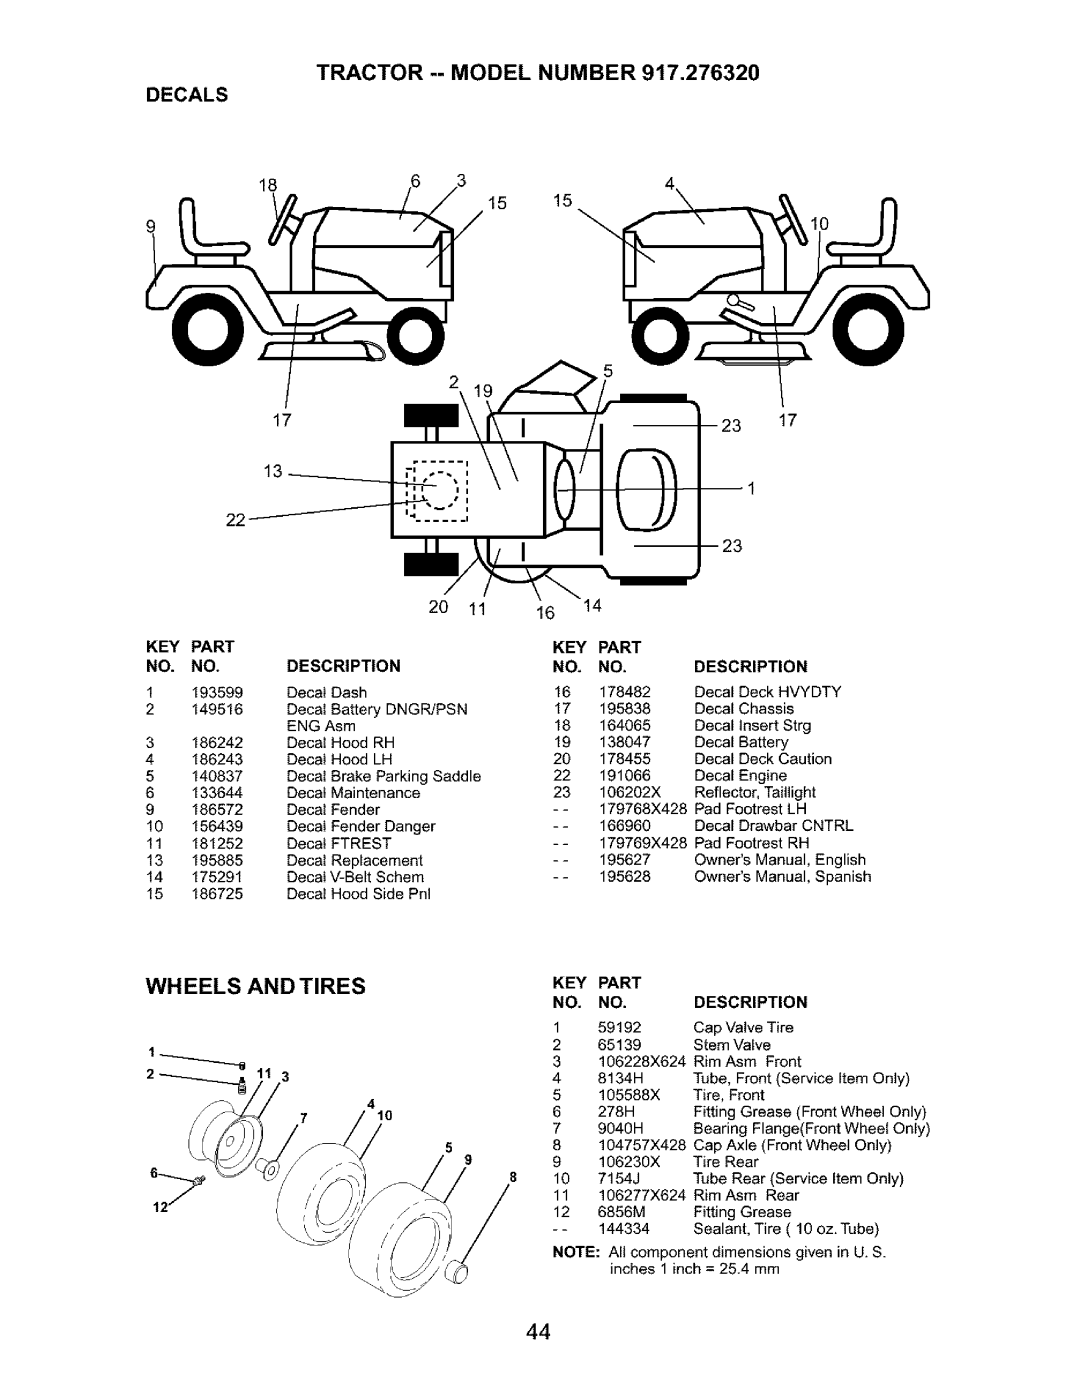 Craftsman 917.27632 owner manual Tractor --Model Number Decals, Wheels And Tires 